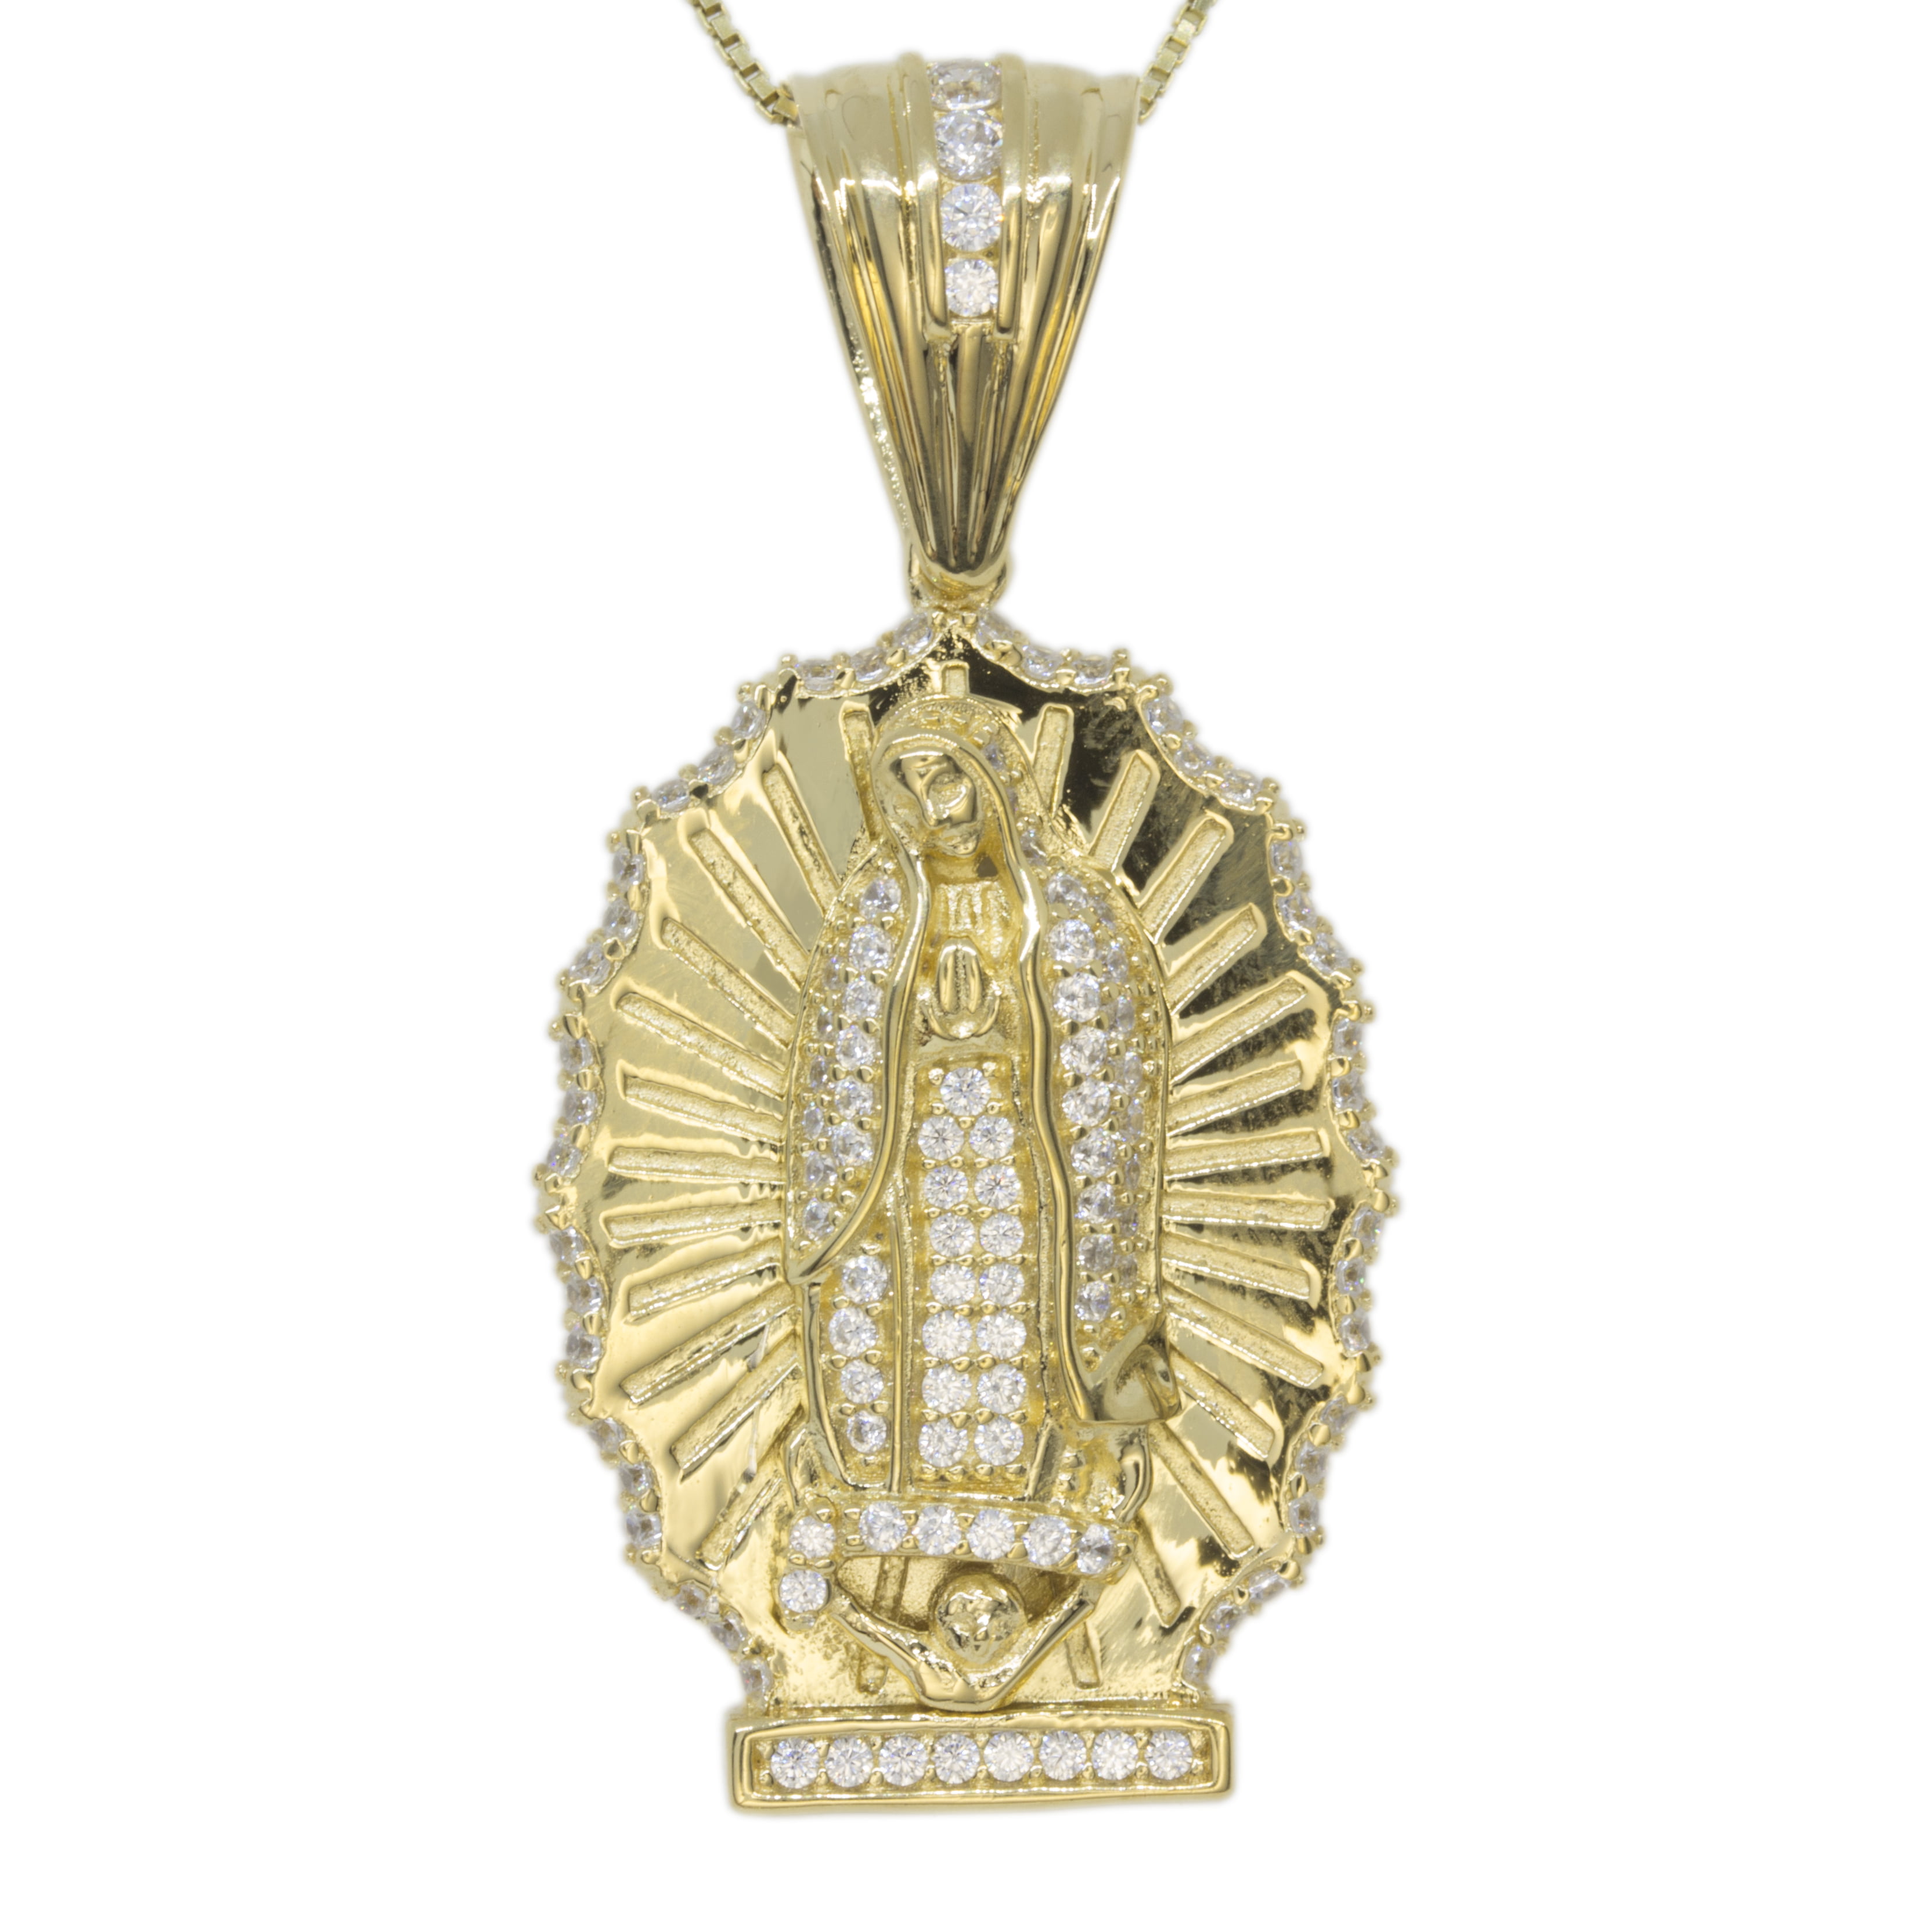 Virgin Mary w Bling Garment Santa Maria w Shiny Garment Pendant Necklace by  JamesJenny Yellow Gold Plated Solid 925 Sterling Silver CZ Studded Accents 